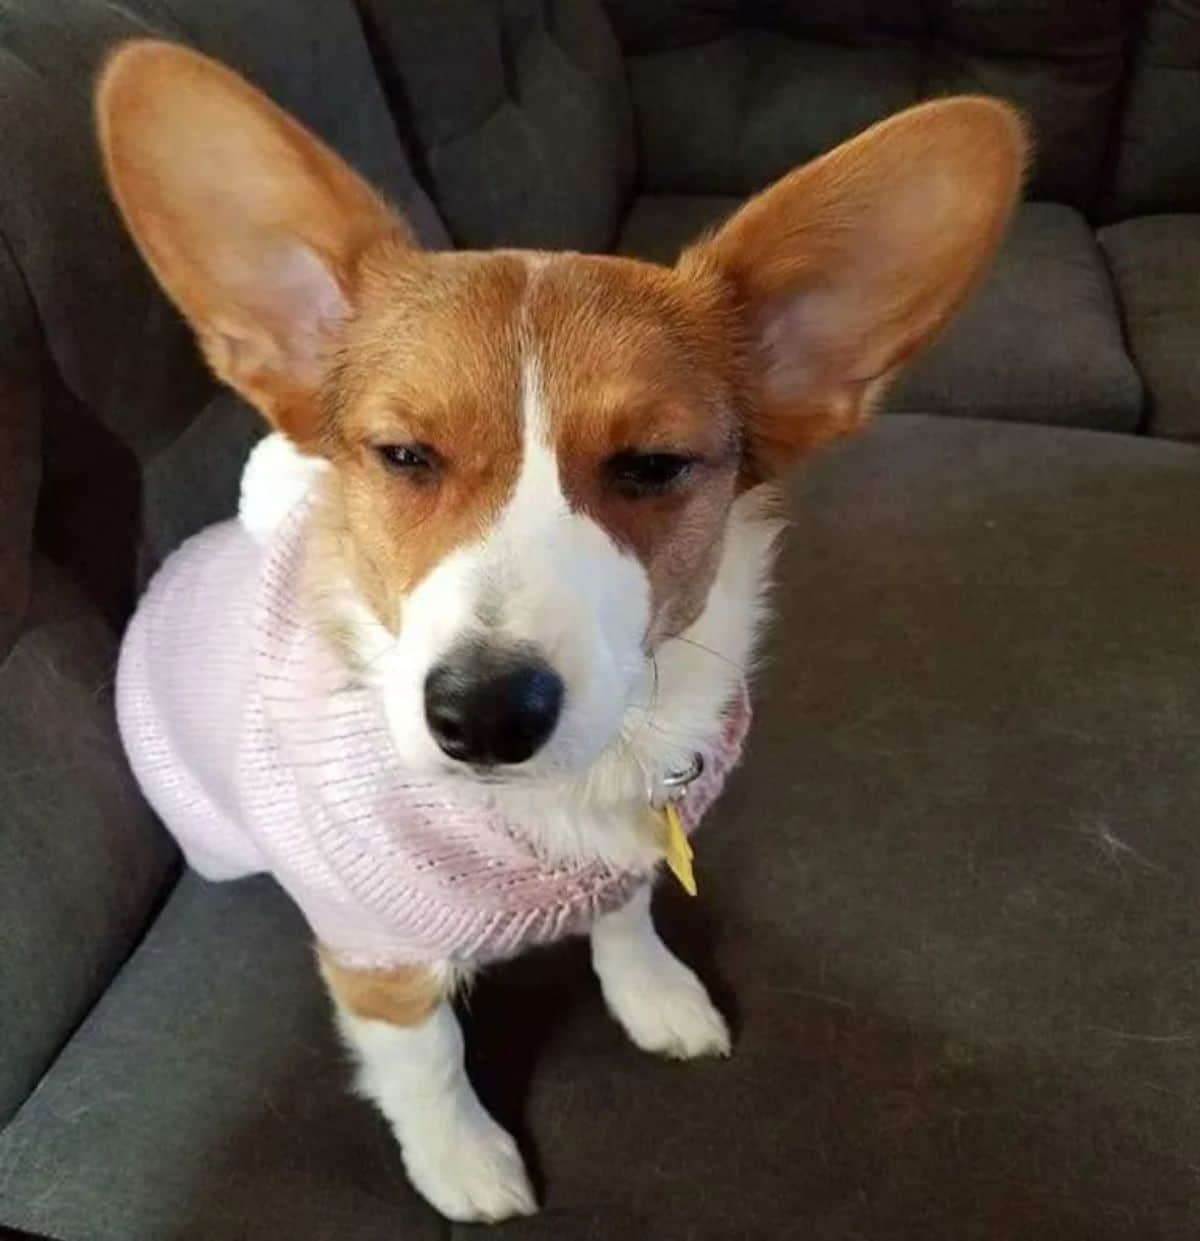 grumpy looking brown and white corgi in a pink sweater sitting on a black car seat